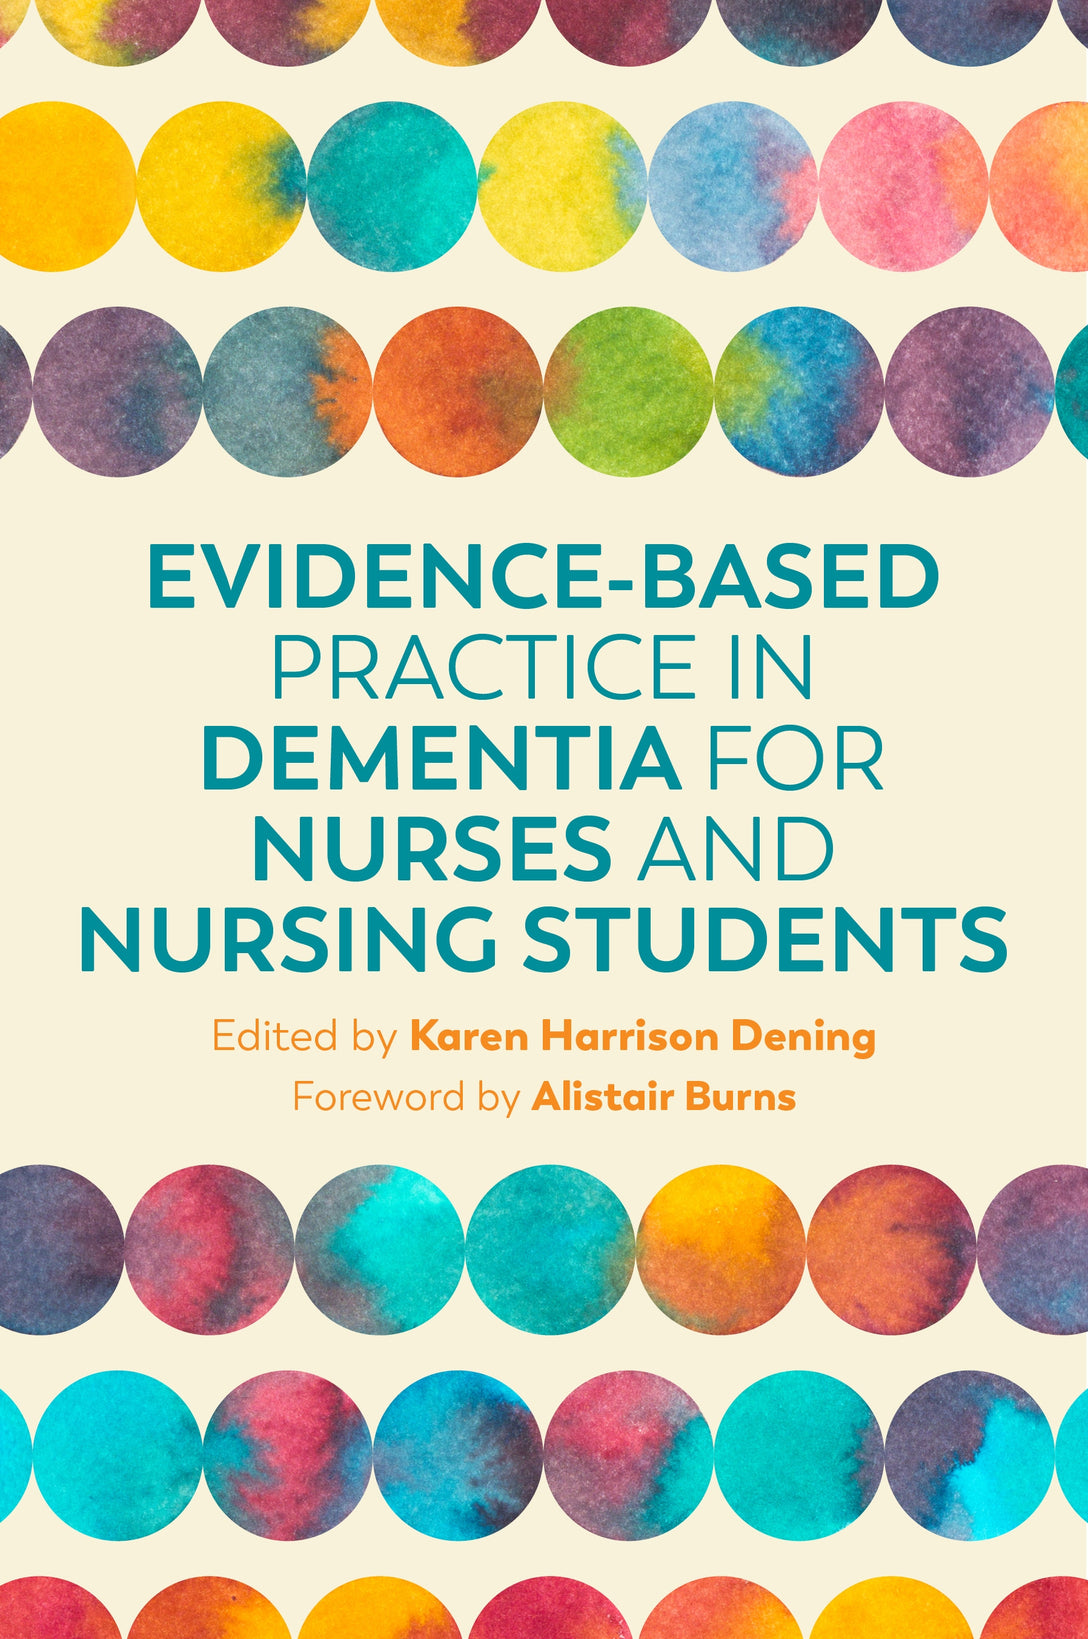 Evidence-Based Practice in Dementia for Nurses and Nursing Students by Karen Harrison Dening, Alistair Burns, No Author Listed